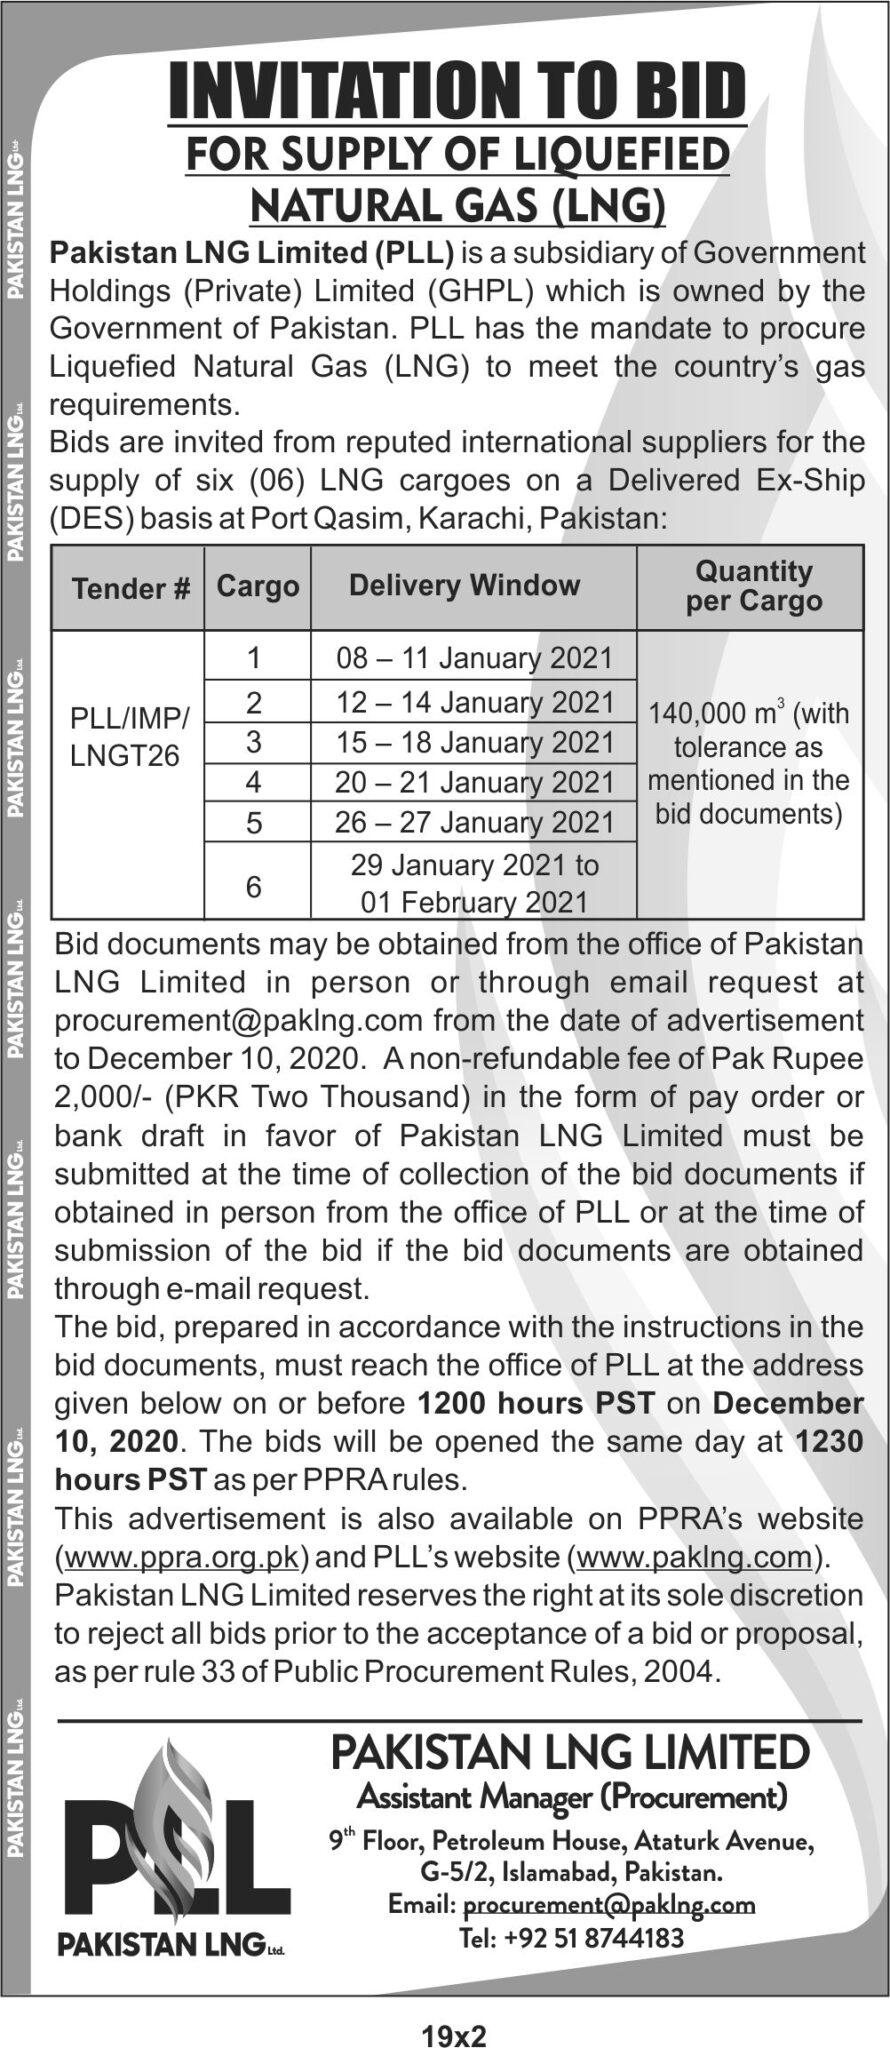 Pakistan to Import 6 More Cargoes of LNG for January